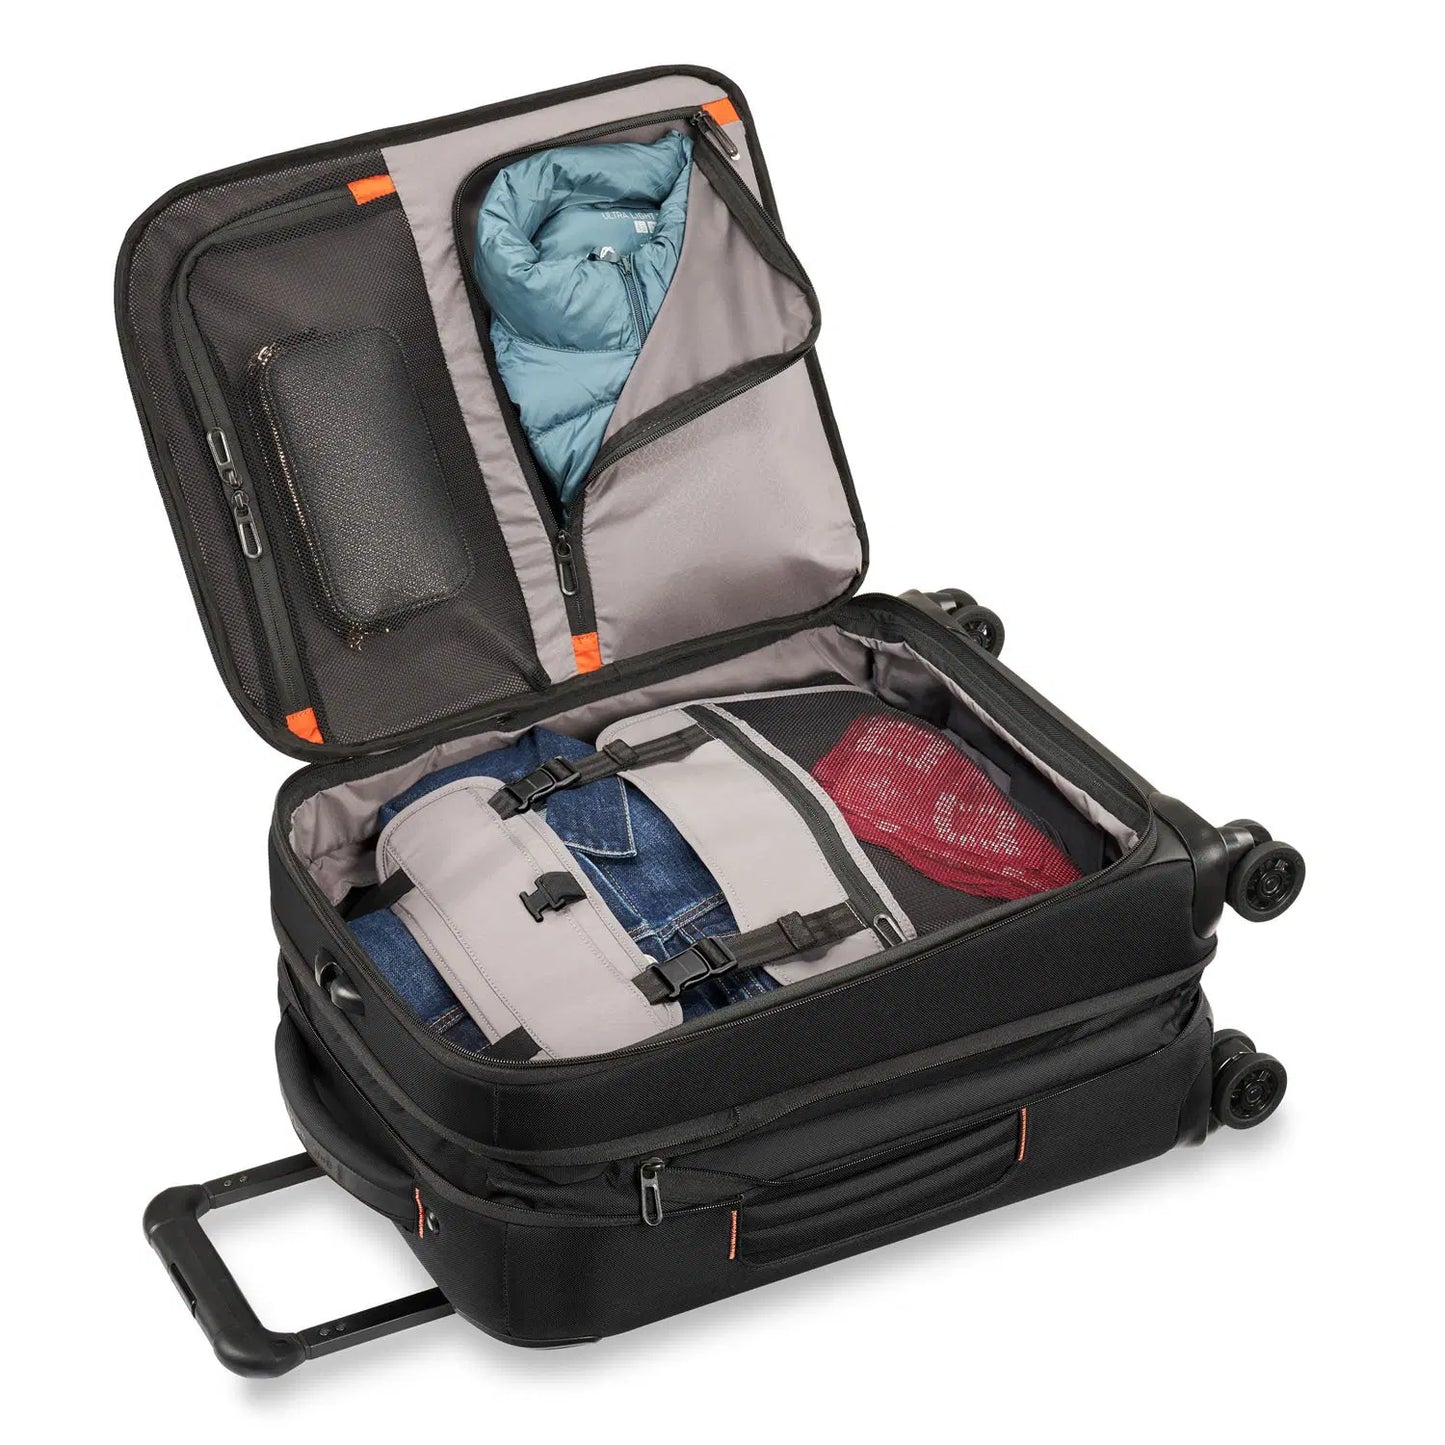 Briggs & Riley Carry-on Spinner ZXU122SPX